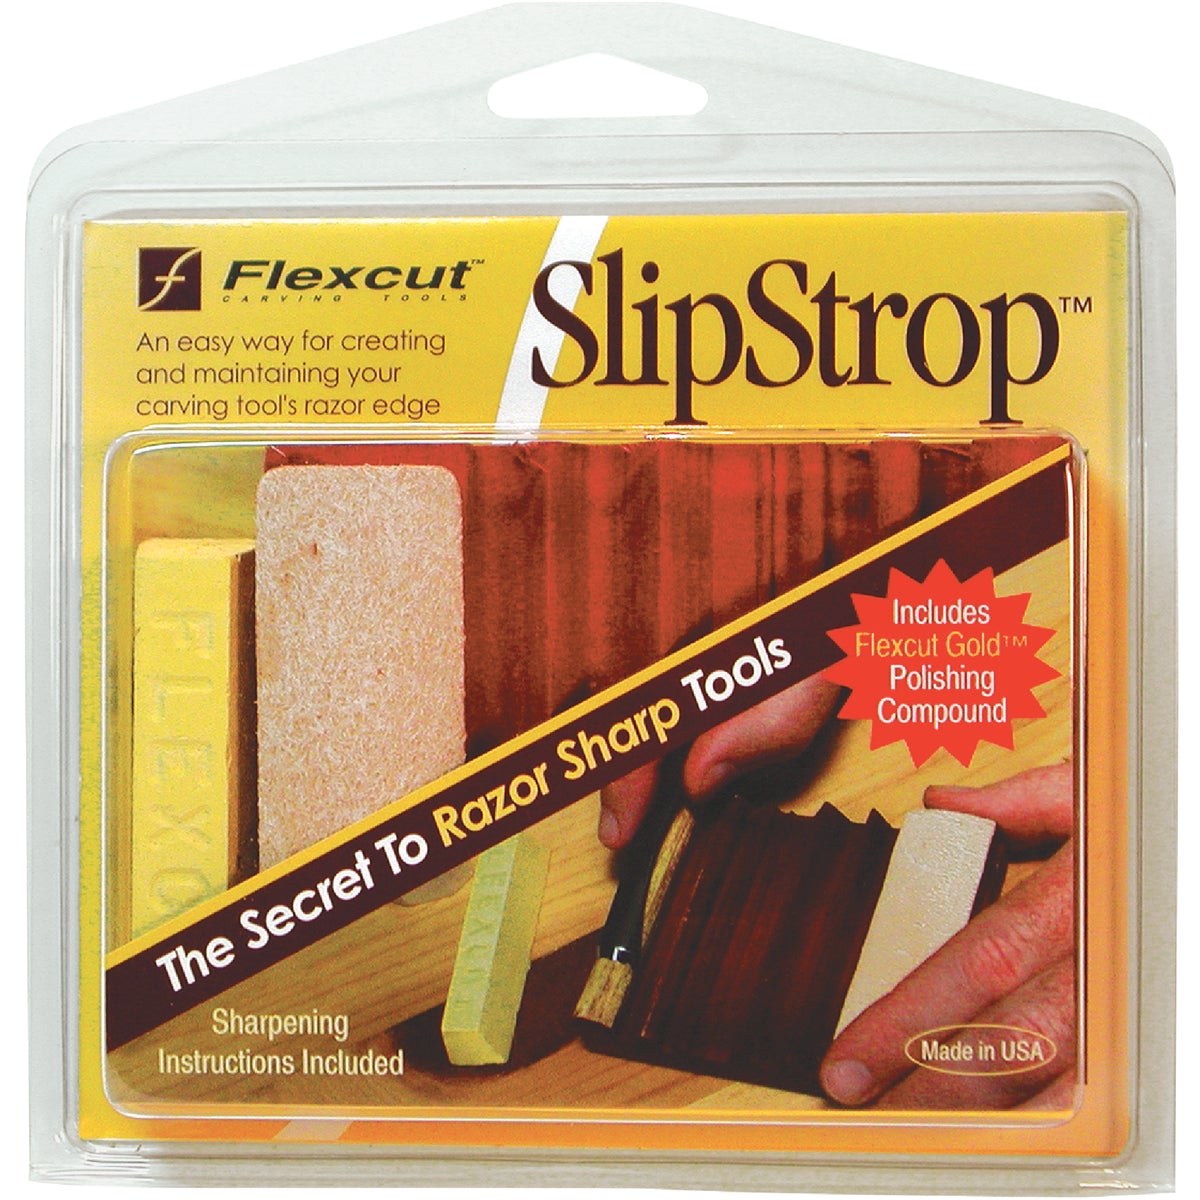 Item 353414, The Flexcut SlipStrop is an economical way for maintaining tool's razor 